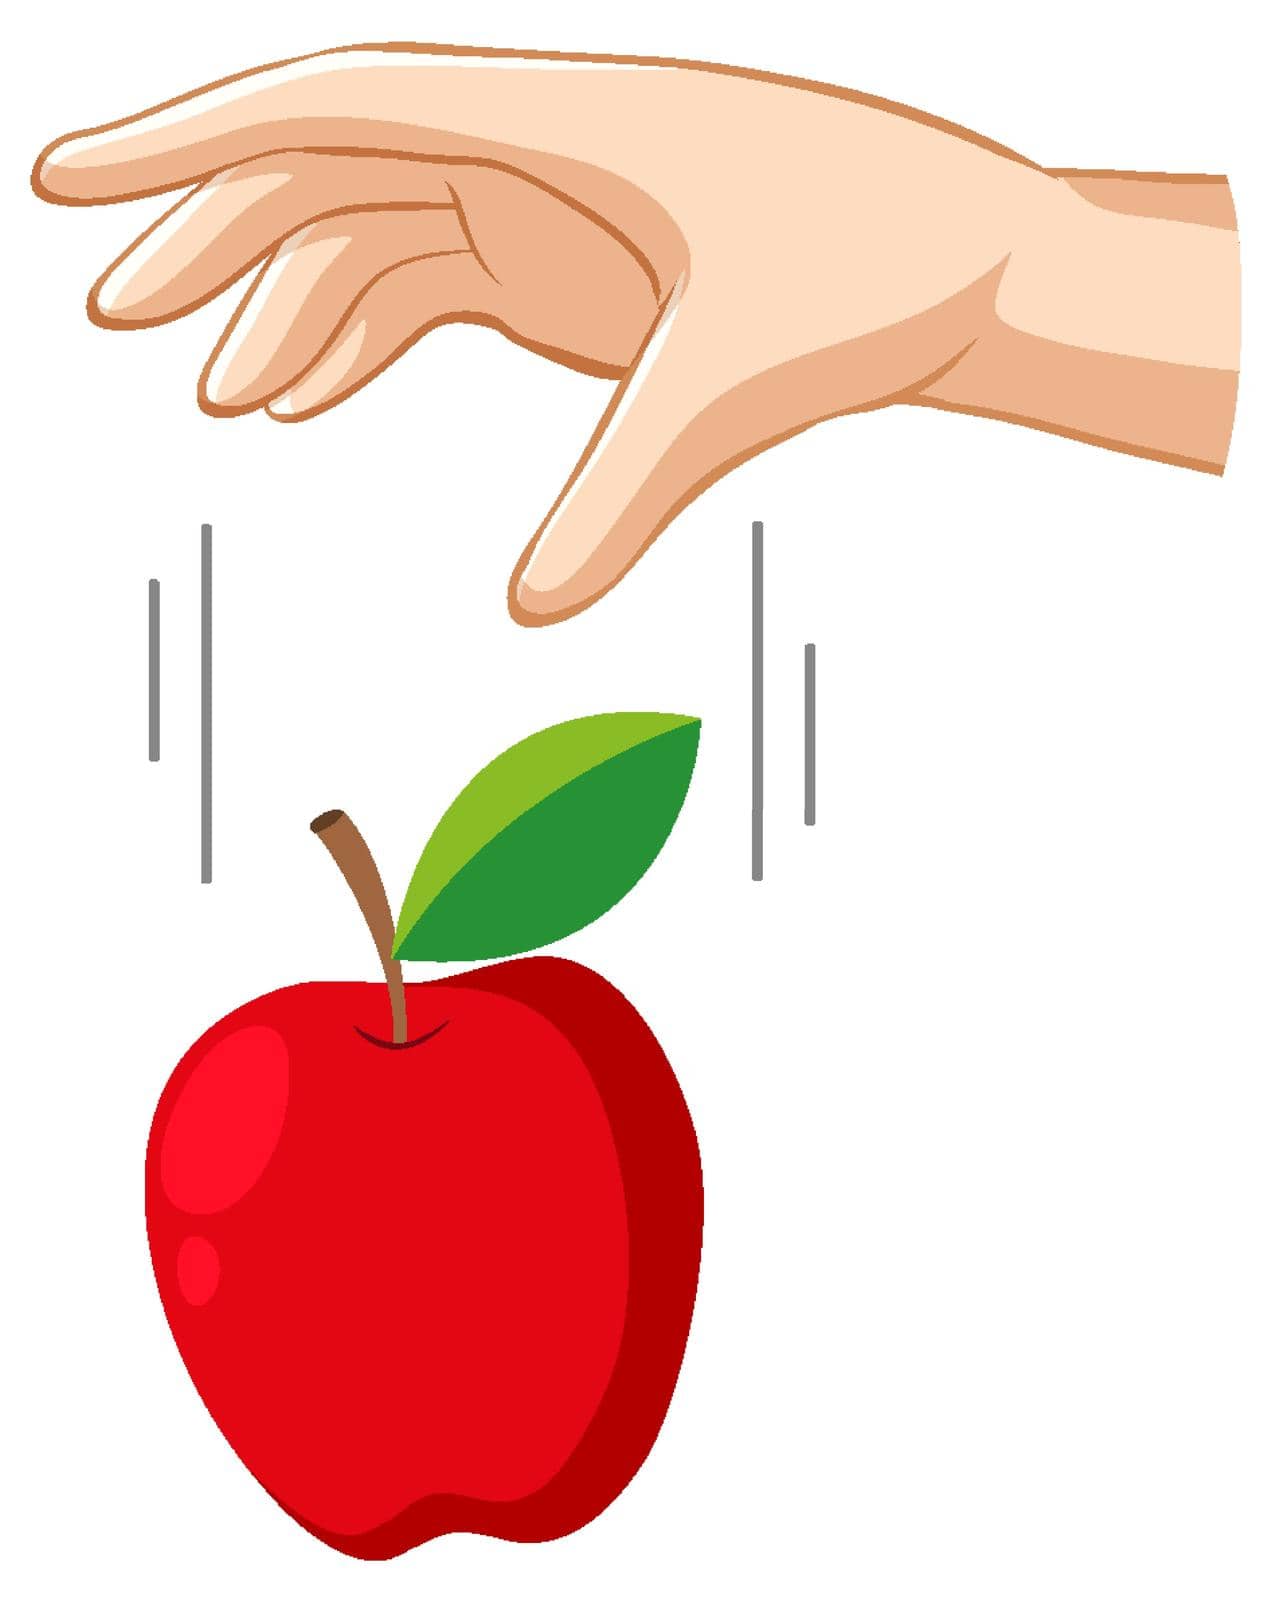 Hand dropping an apple for gravity experiment illustration